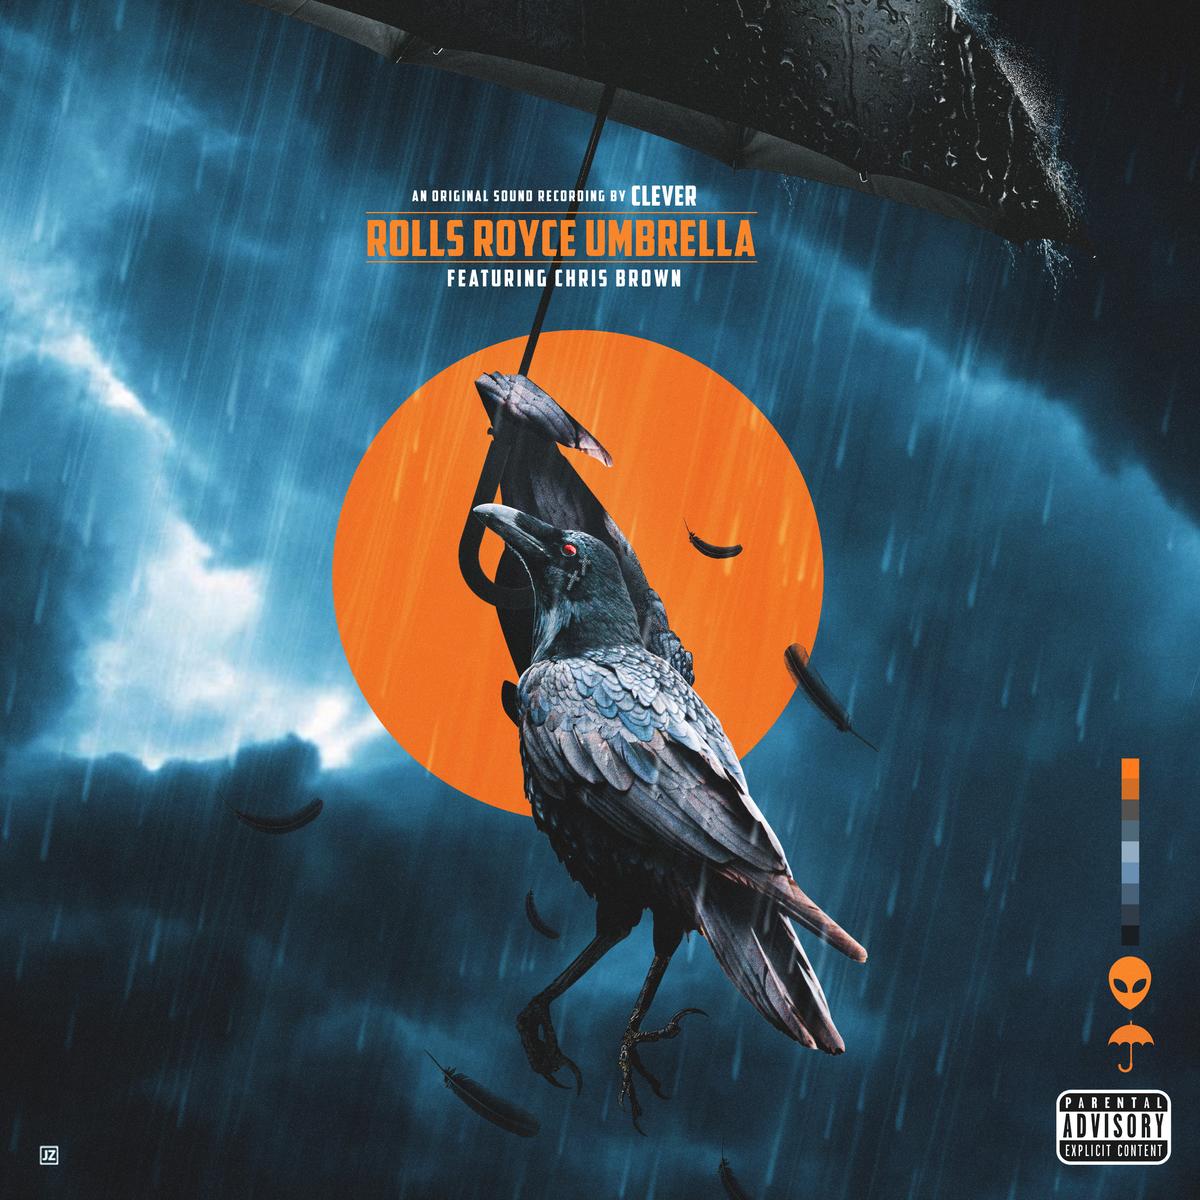 Clever & Chris Brown Sing Their Hearts Out On “Rolls Royce Umbrella”